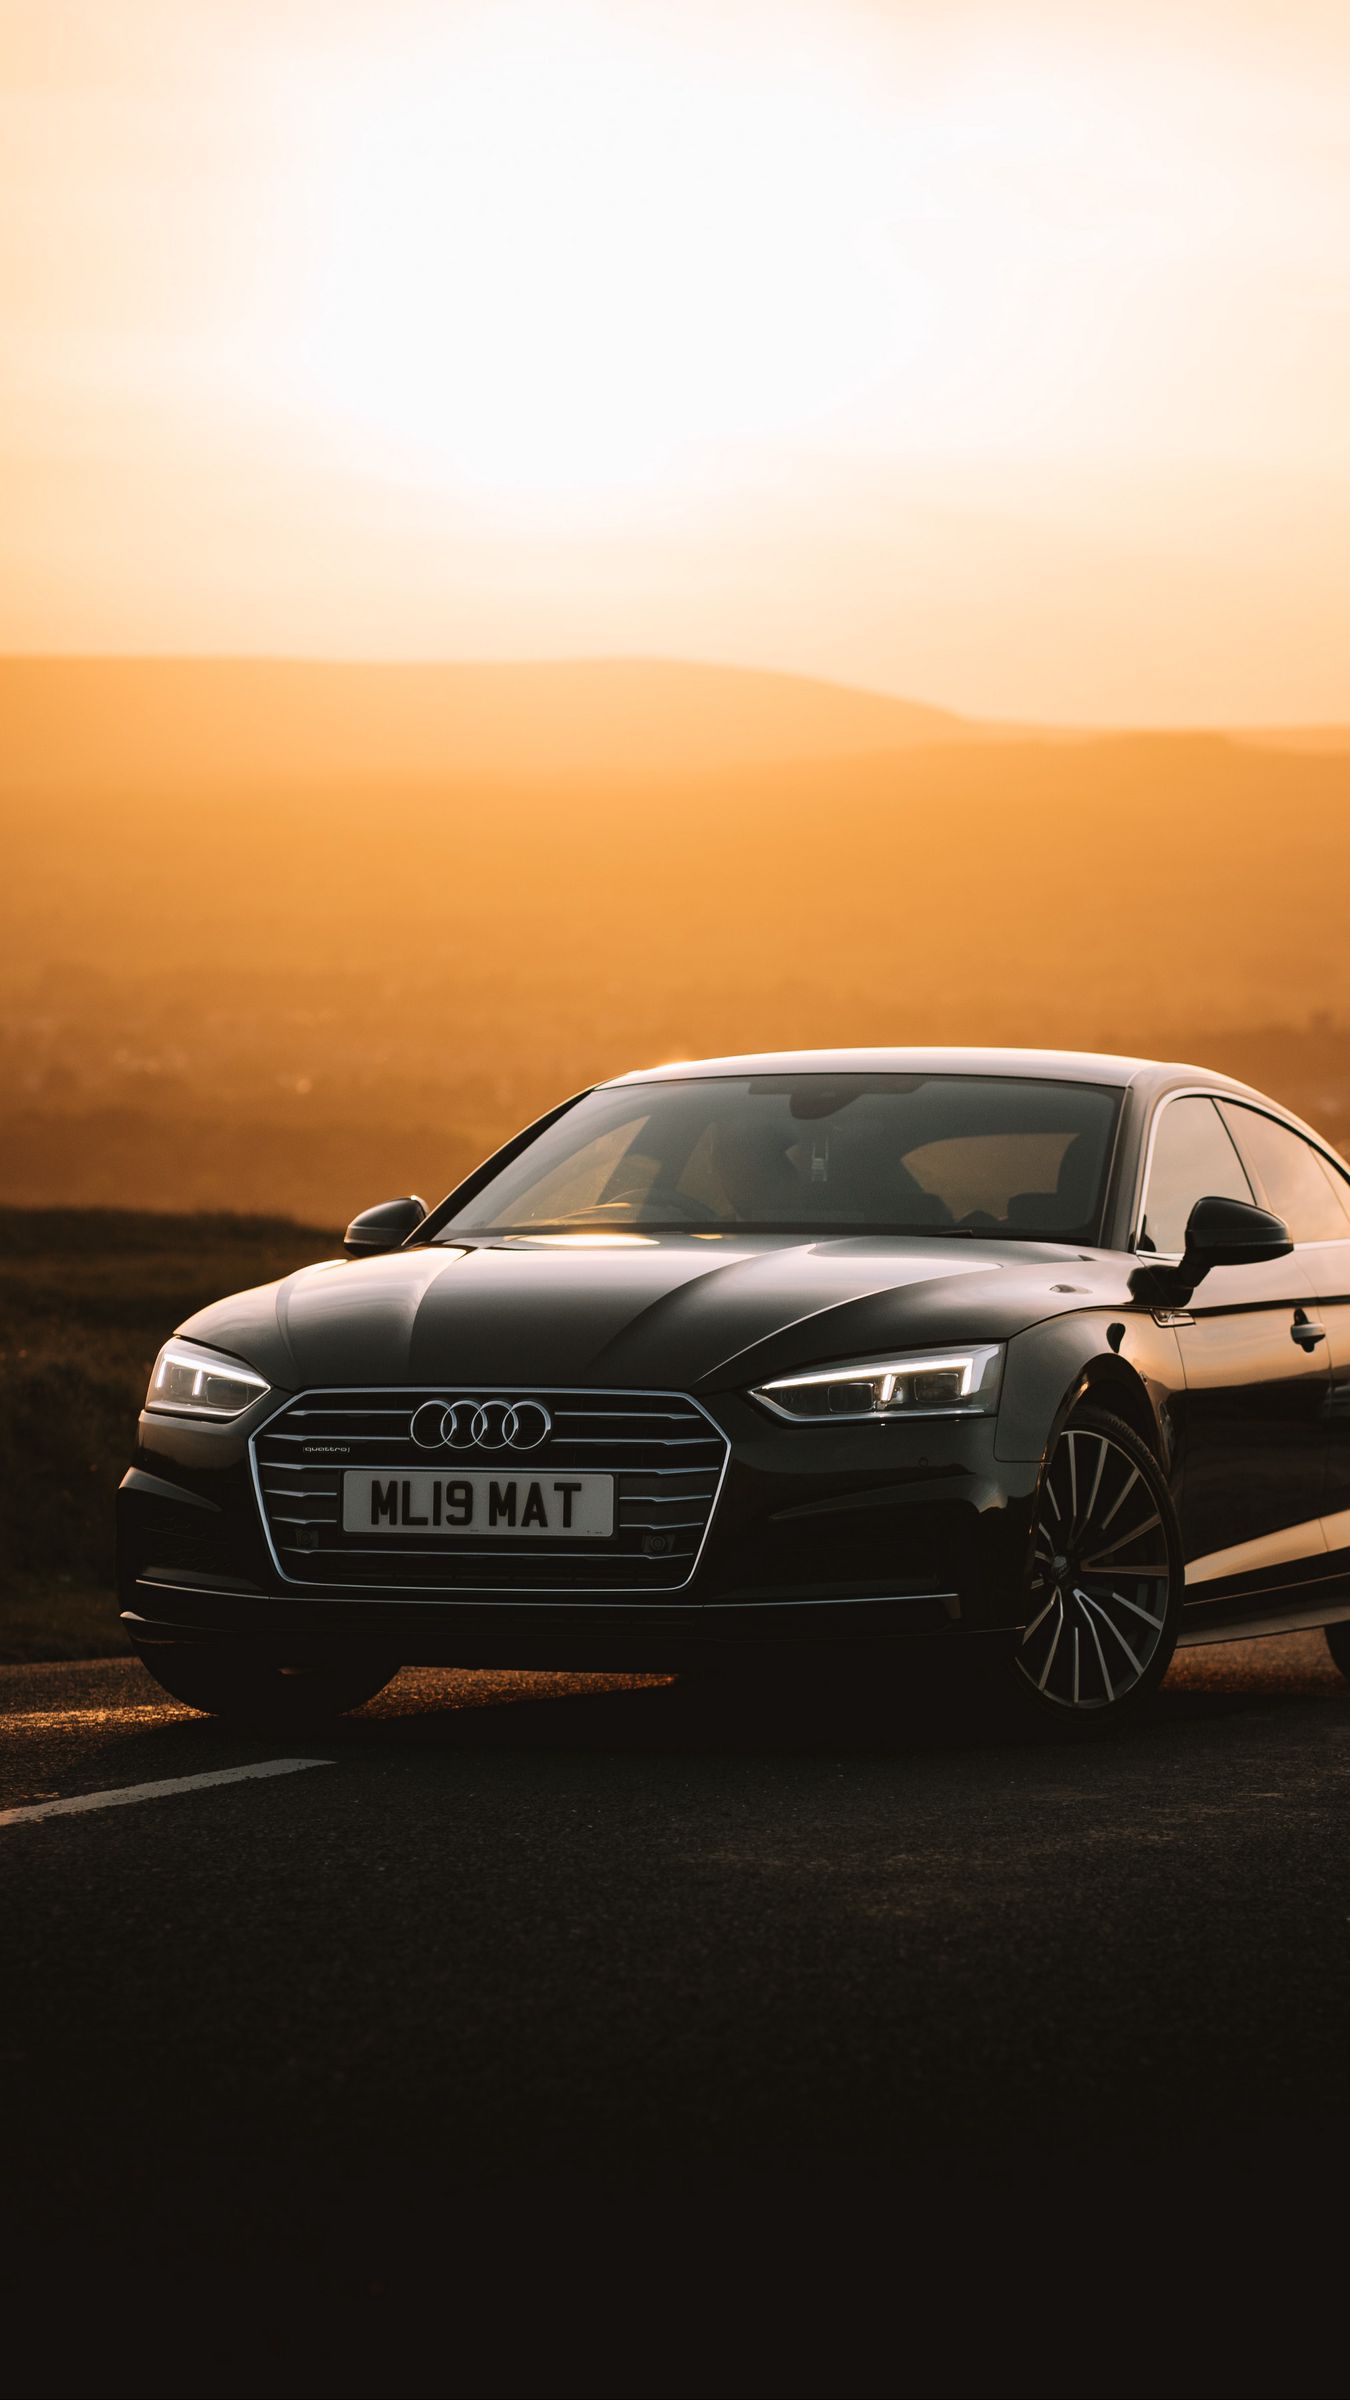 Download wallpaper 1350x2400 audi a6, audi, car, front view, sunset iphone  8+/7+/6s+/6+ for parallax hd background